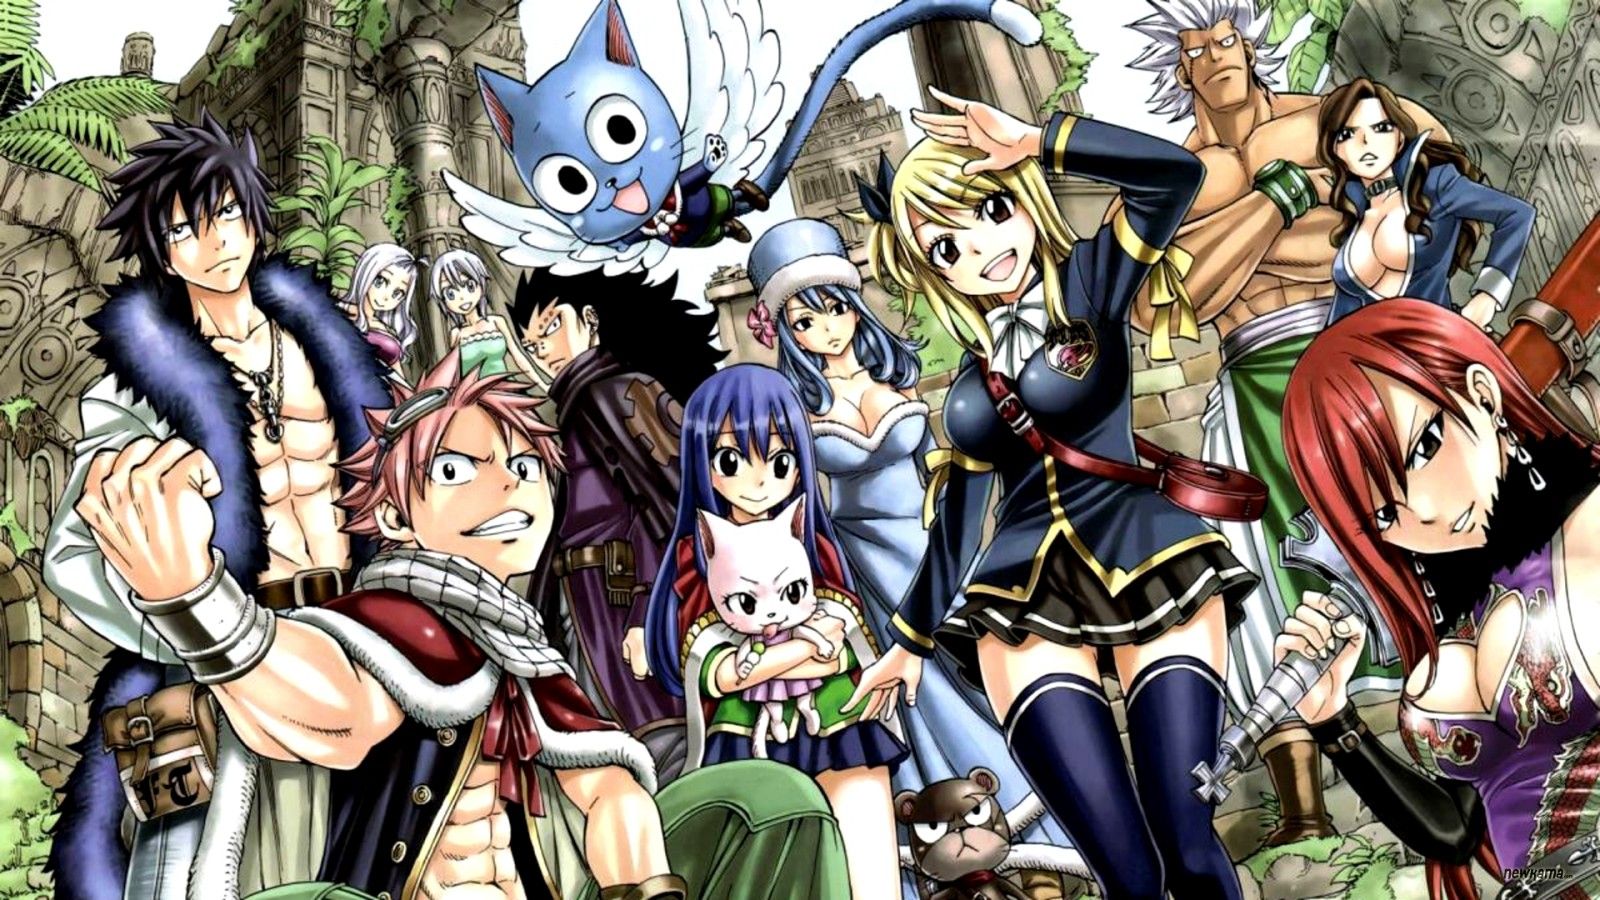 Tag HD Fairy Tail Wallpaper Background And Pictures For